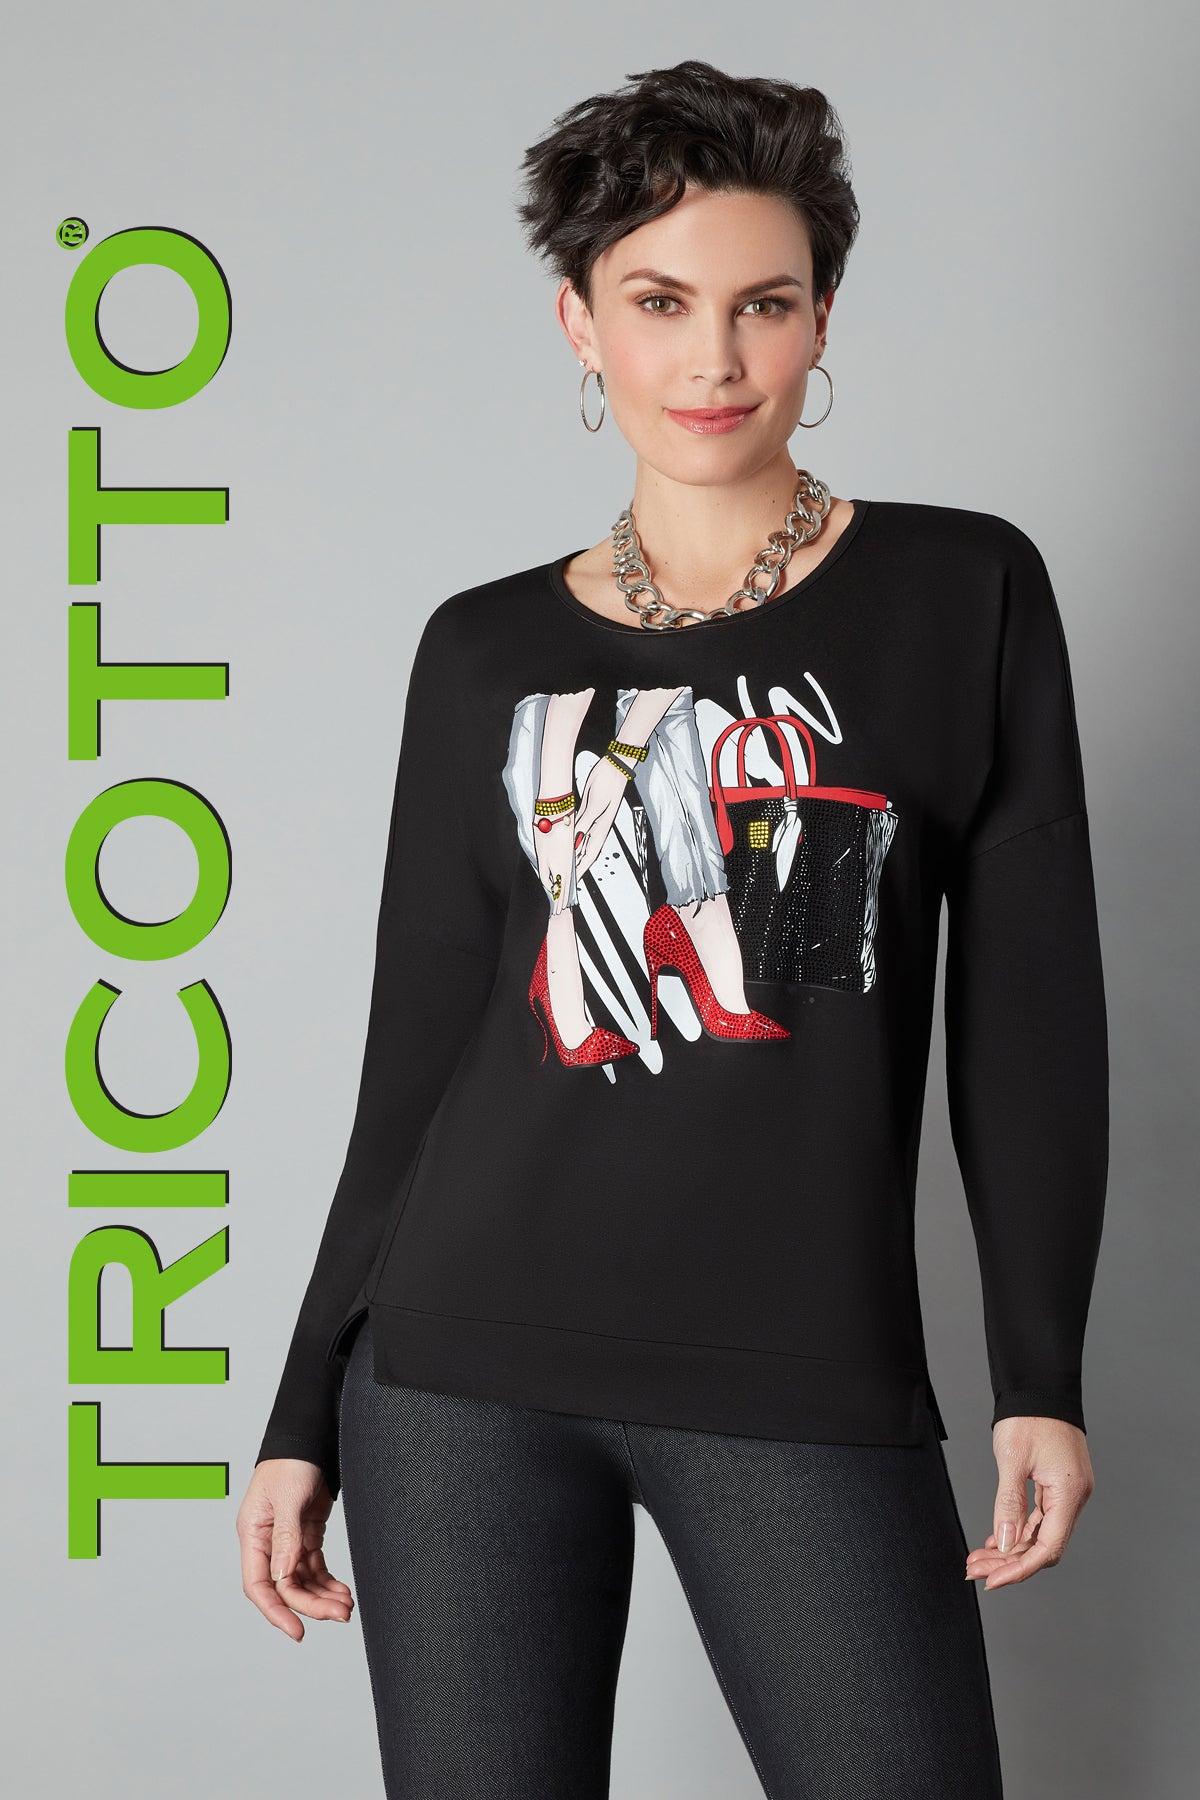 Tricotto T-shirts-Buy Tricotto T-shirts Online-Tricotto Clothing Montreal-High Fashion T-shirts Online